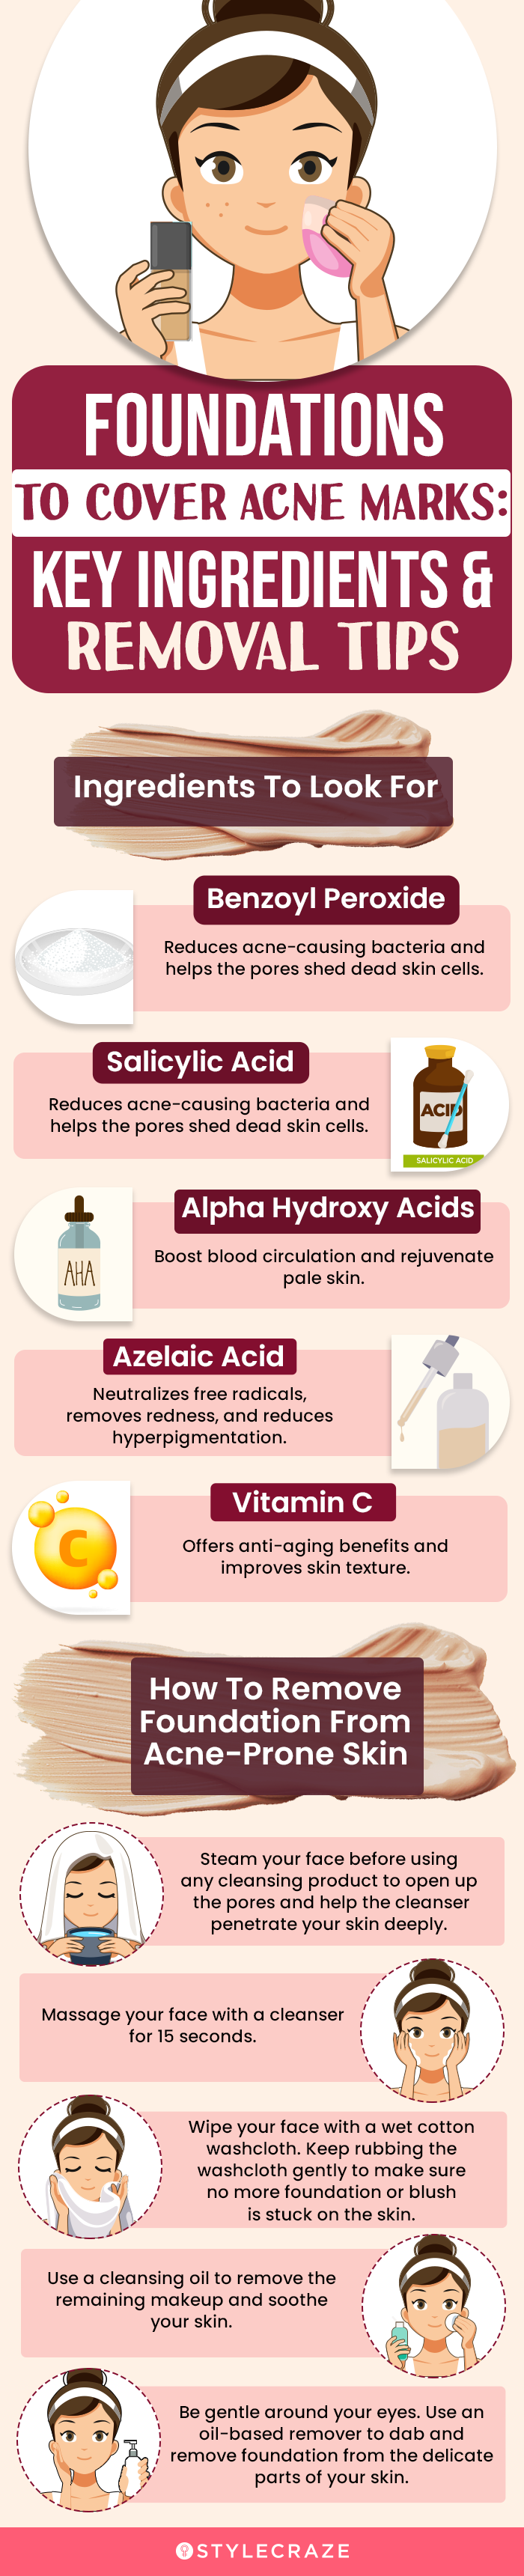 A Brief Guide On Foundations To Cover Acne Marks (infographic)